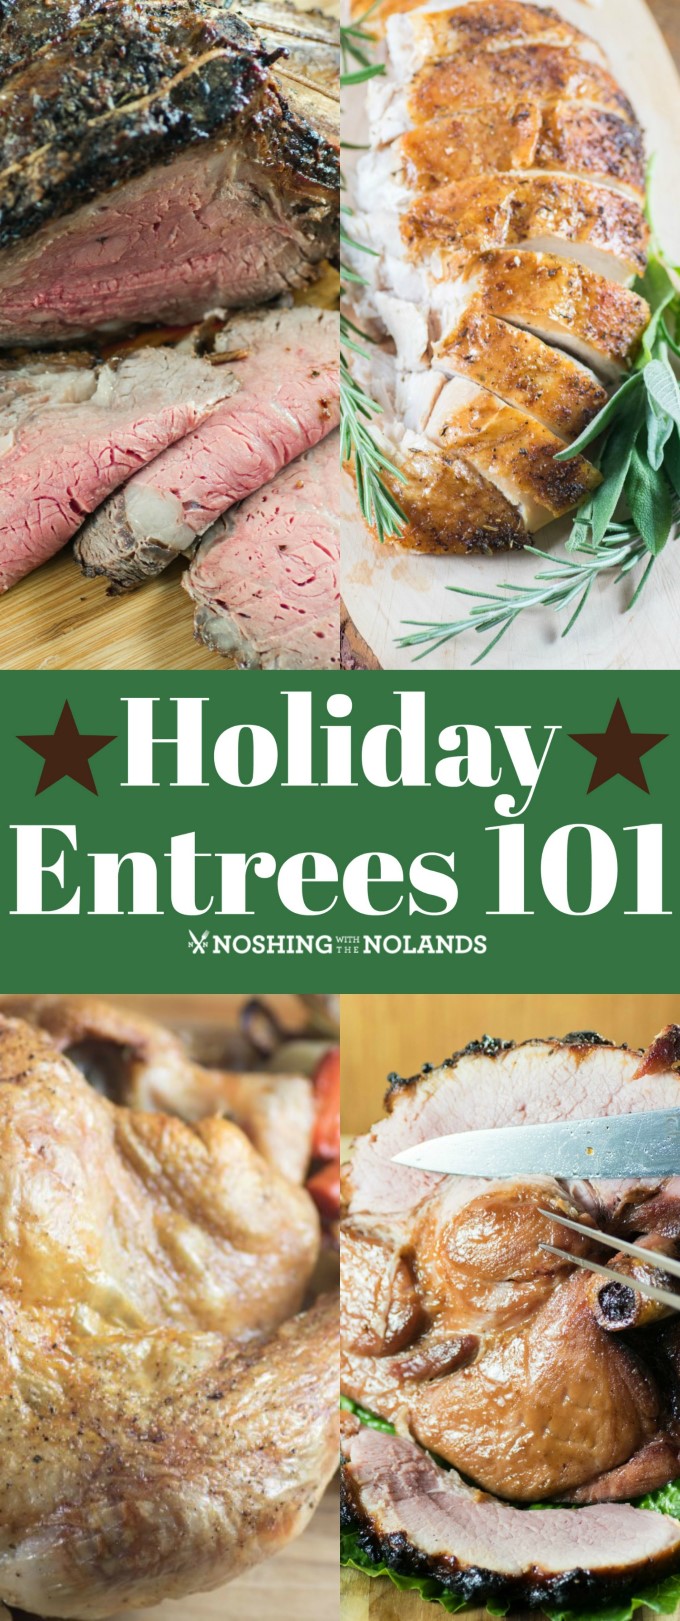 Holiday Entrees 101 will have you set for an festive meal from roast beef to turkey, ham and chicken. #entrees #holidays #mains